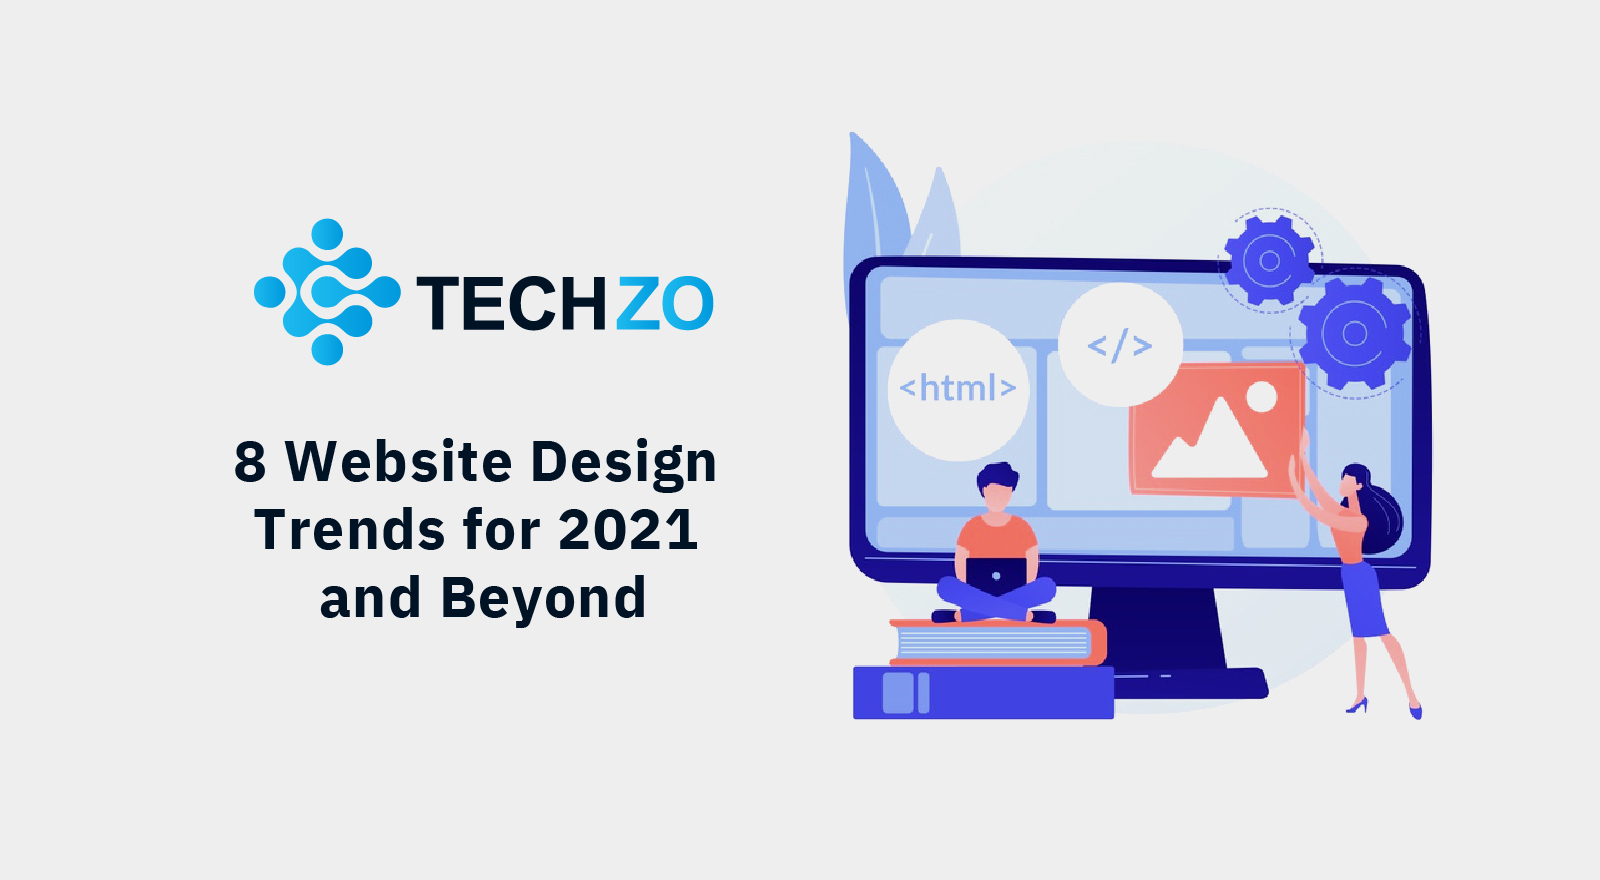 8 Website Design Trends for 2021 and Beyond